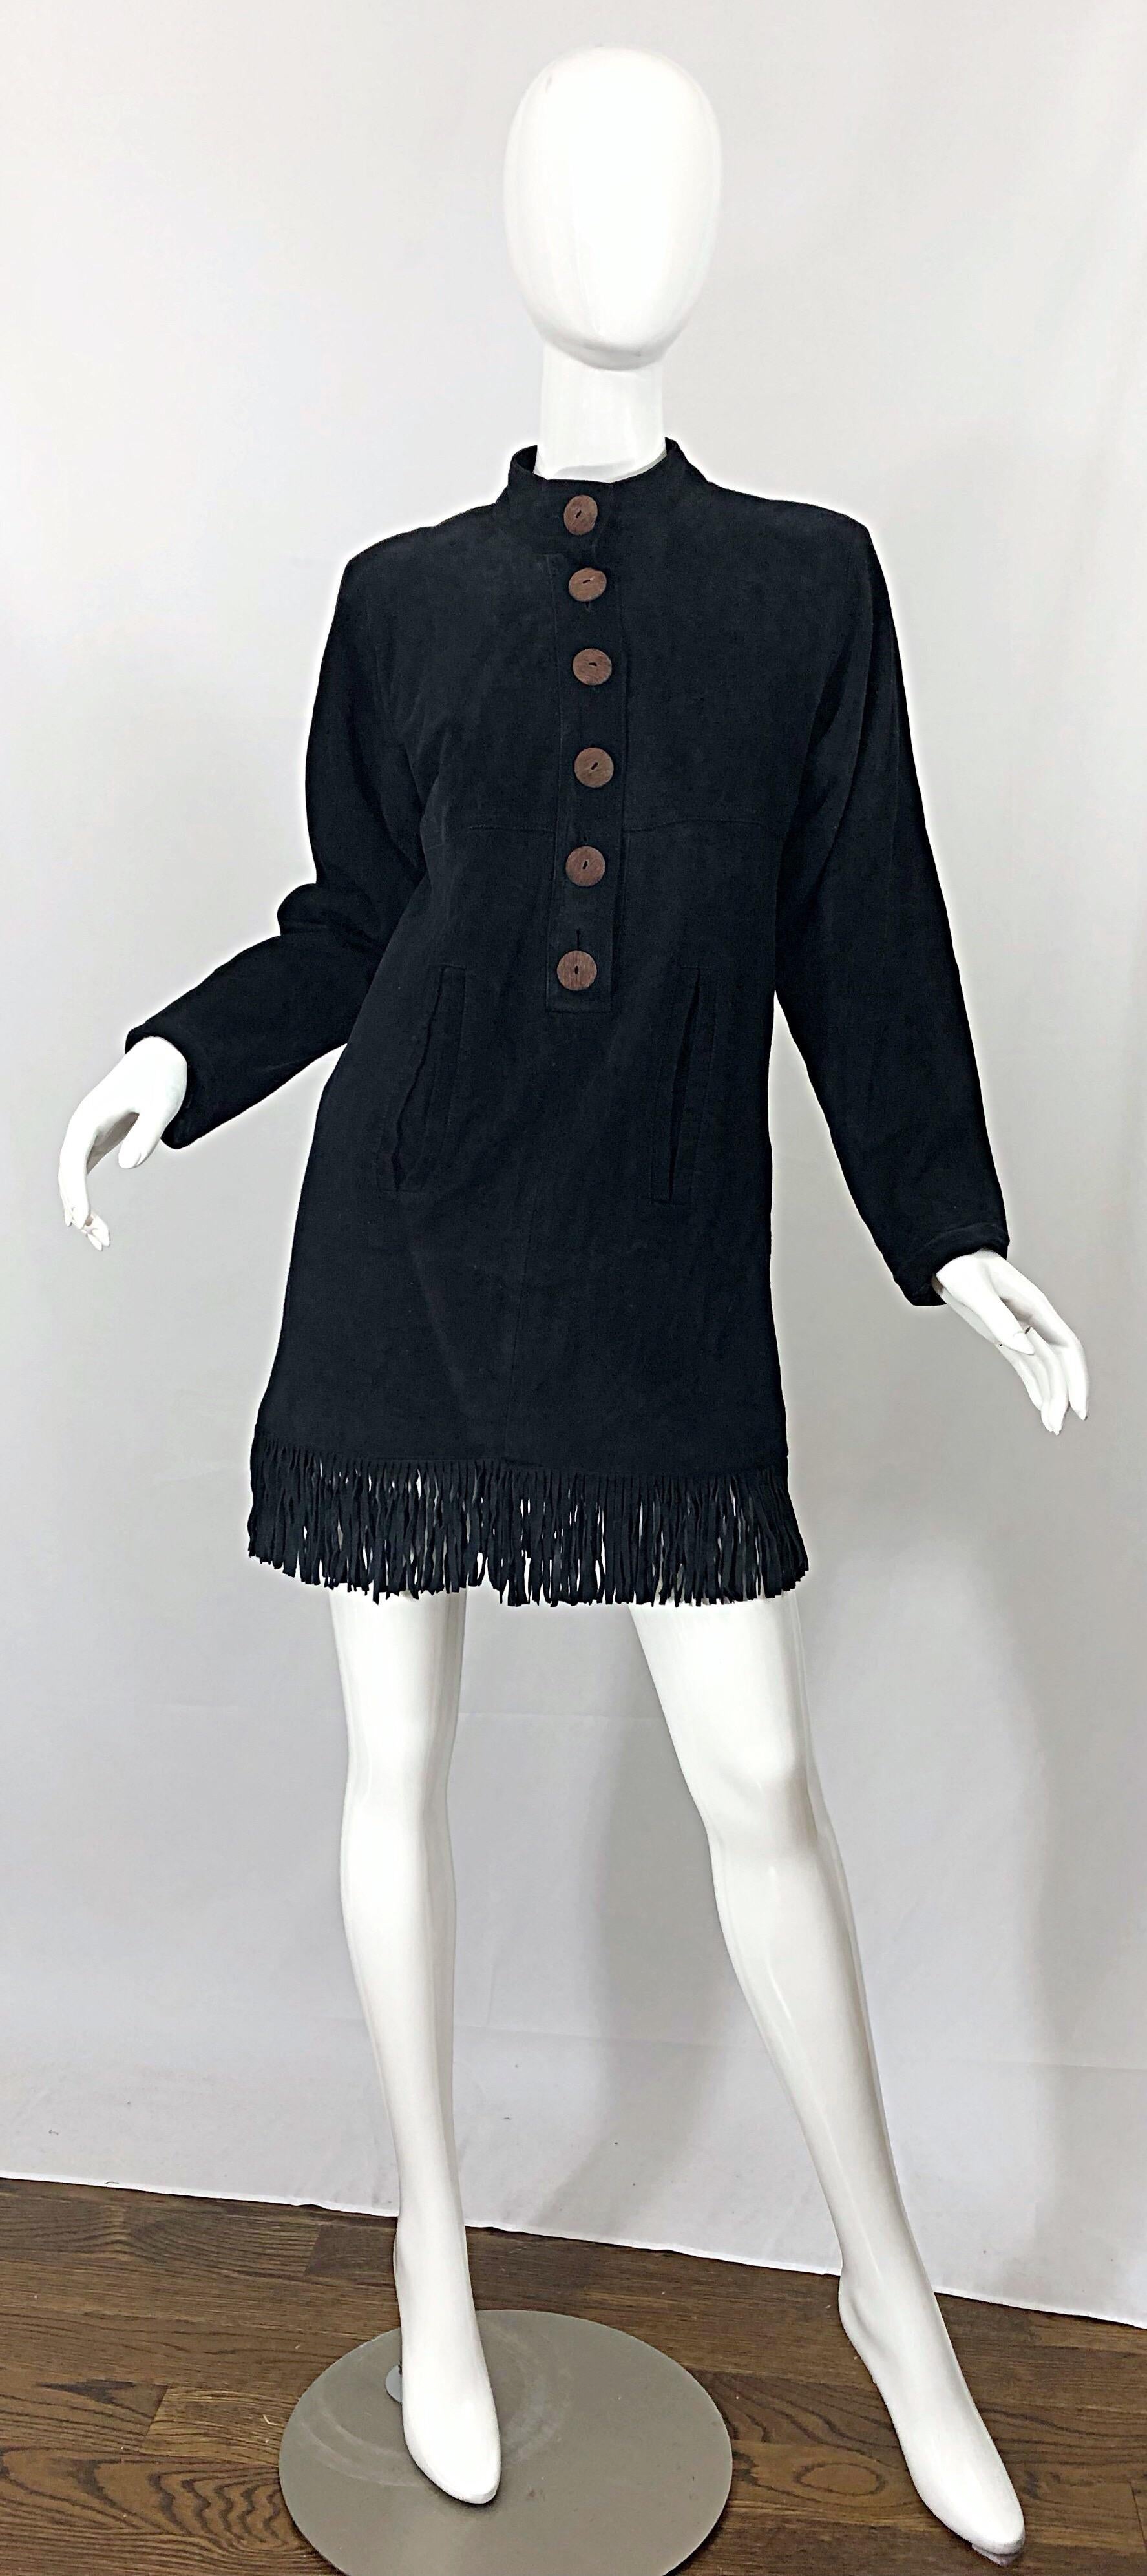 Fabulous vintage 1990s YVES SAINT LAURENT ( YSL ) Rive Gauche black suede nehru style fringed tunic dress! Features six large wood buttons up the front. Pockets at each side of the waist. Luxurious suede that will last forever! Fully lined. Great